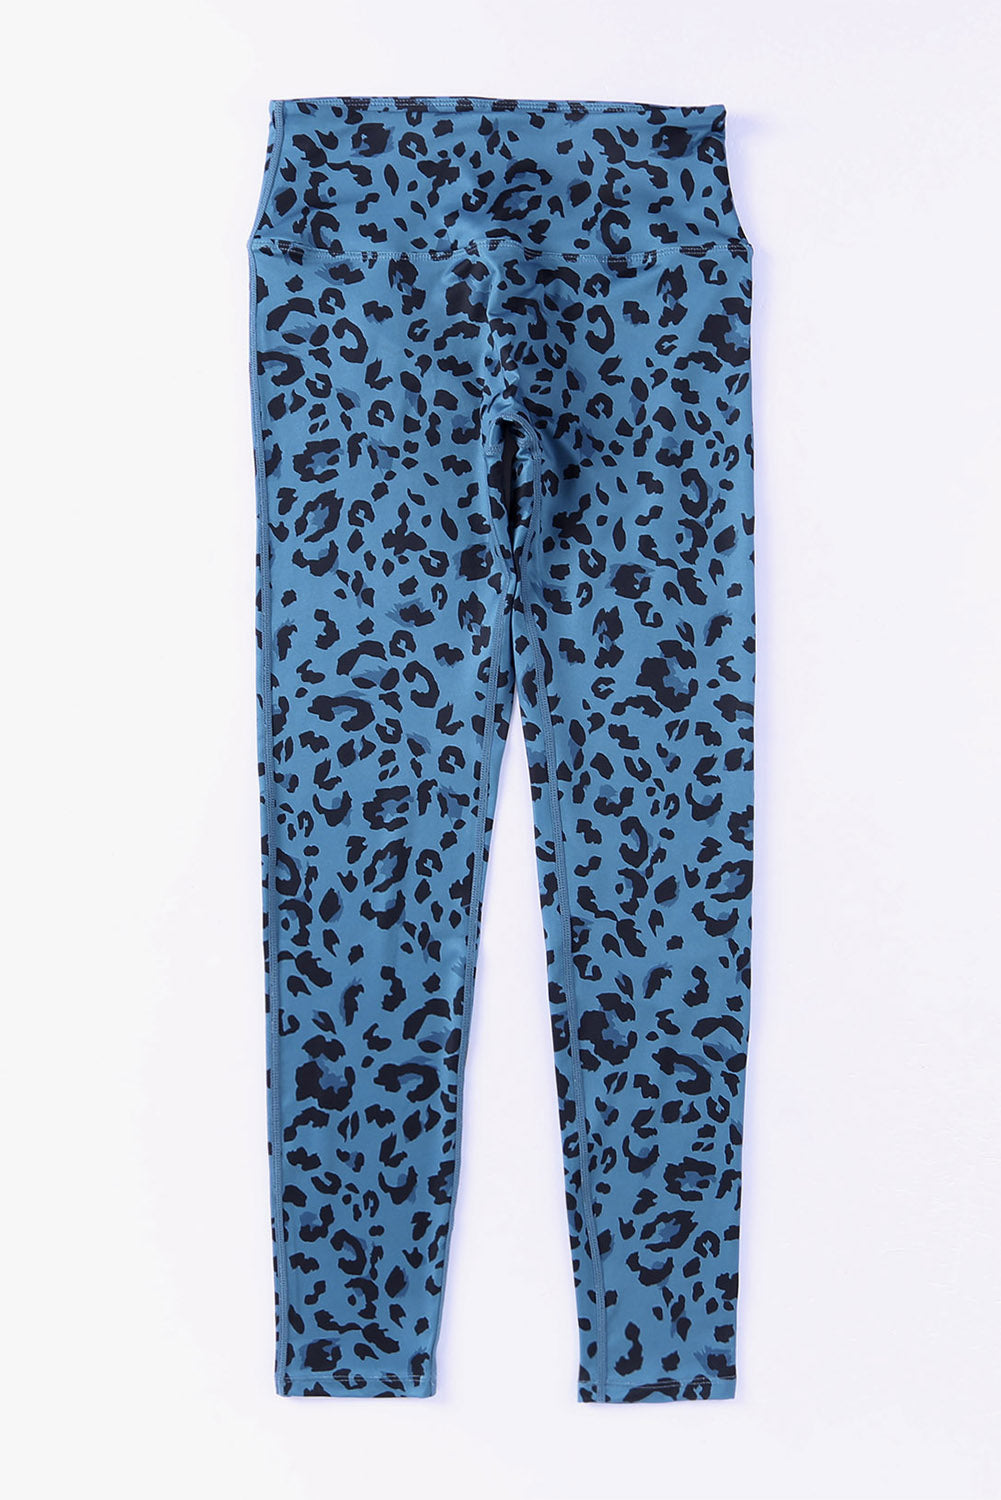 Leopard Print Wide Waistband Leggings Print on any thing USA/STOD clothes